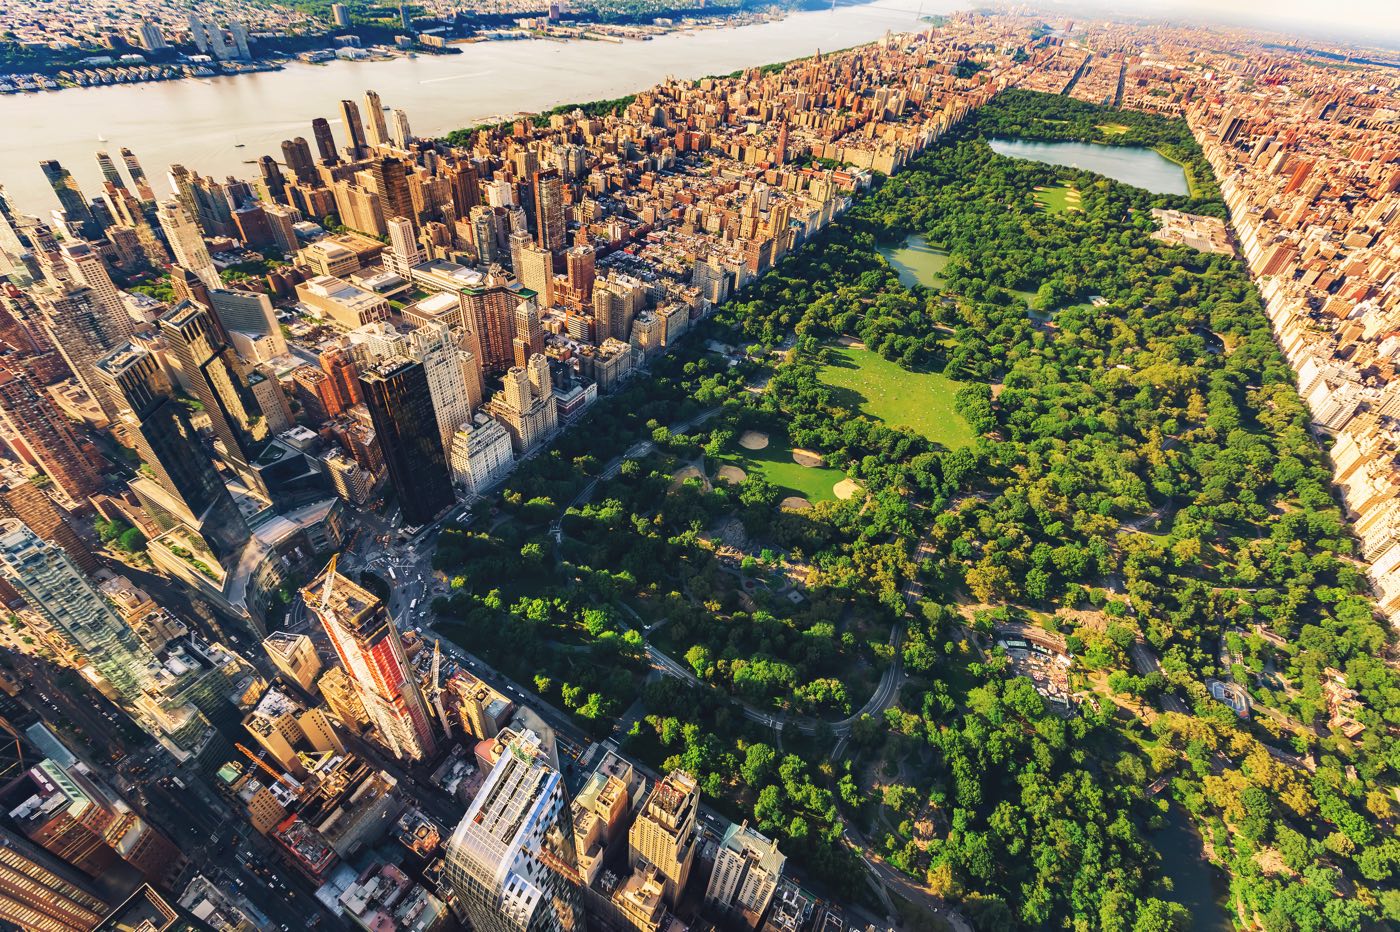 20 FUN & MEMORABLE THINGS TO DO IN CENTRAL PARK